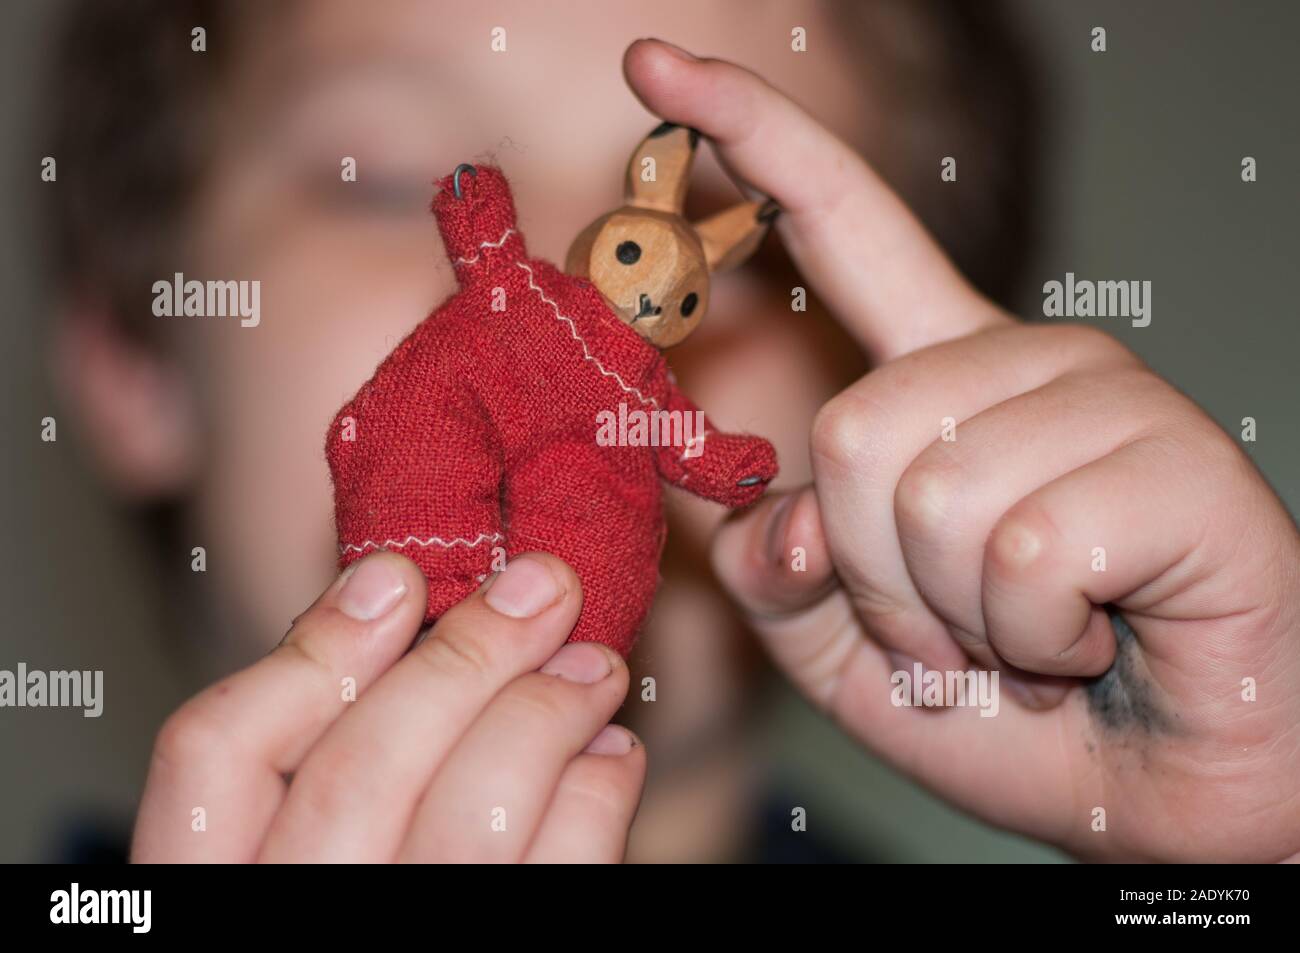 A child playing with rag wooden bunnies, analog toys Stock Photo